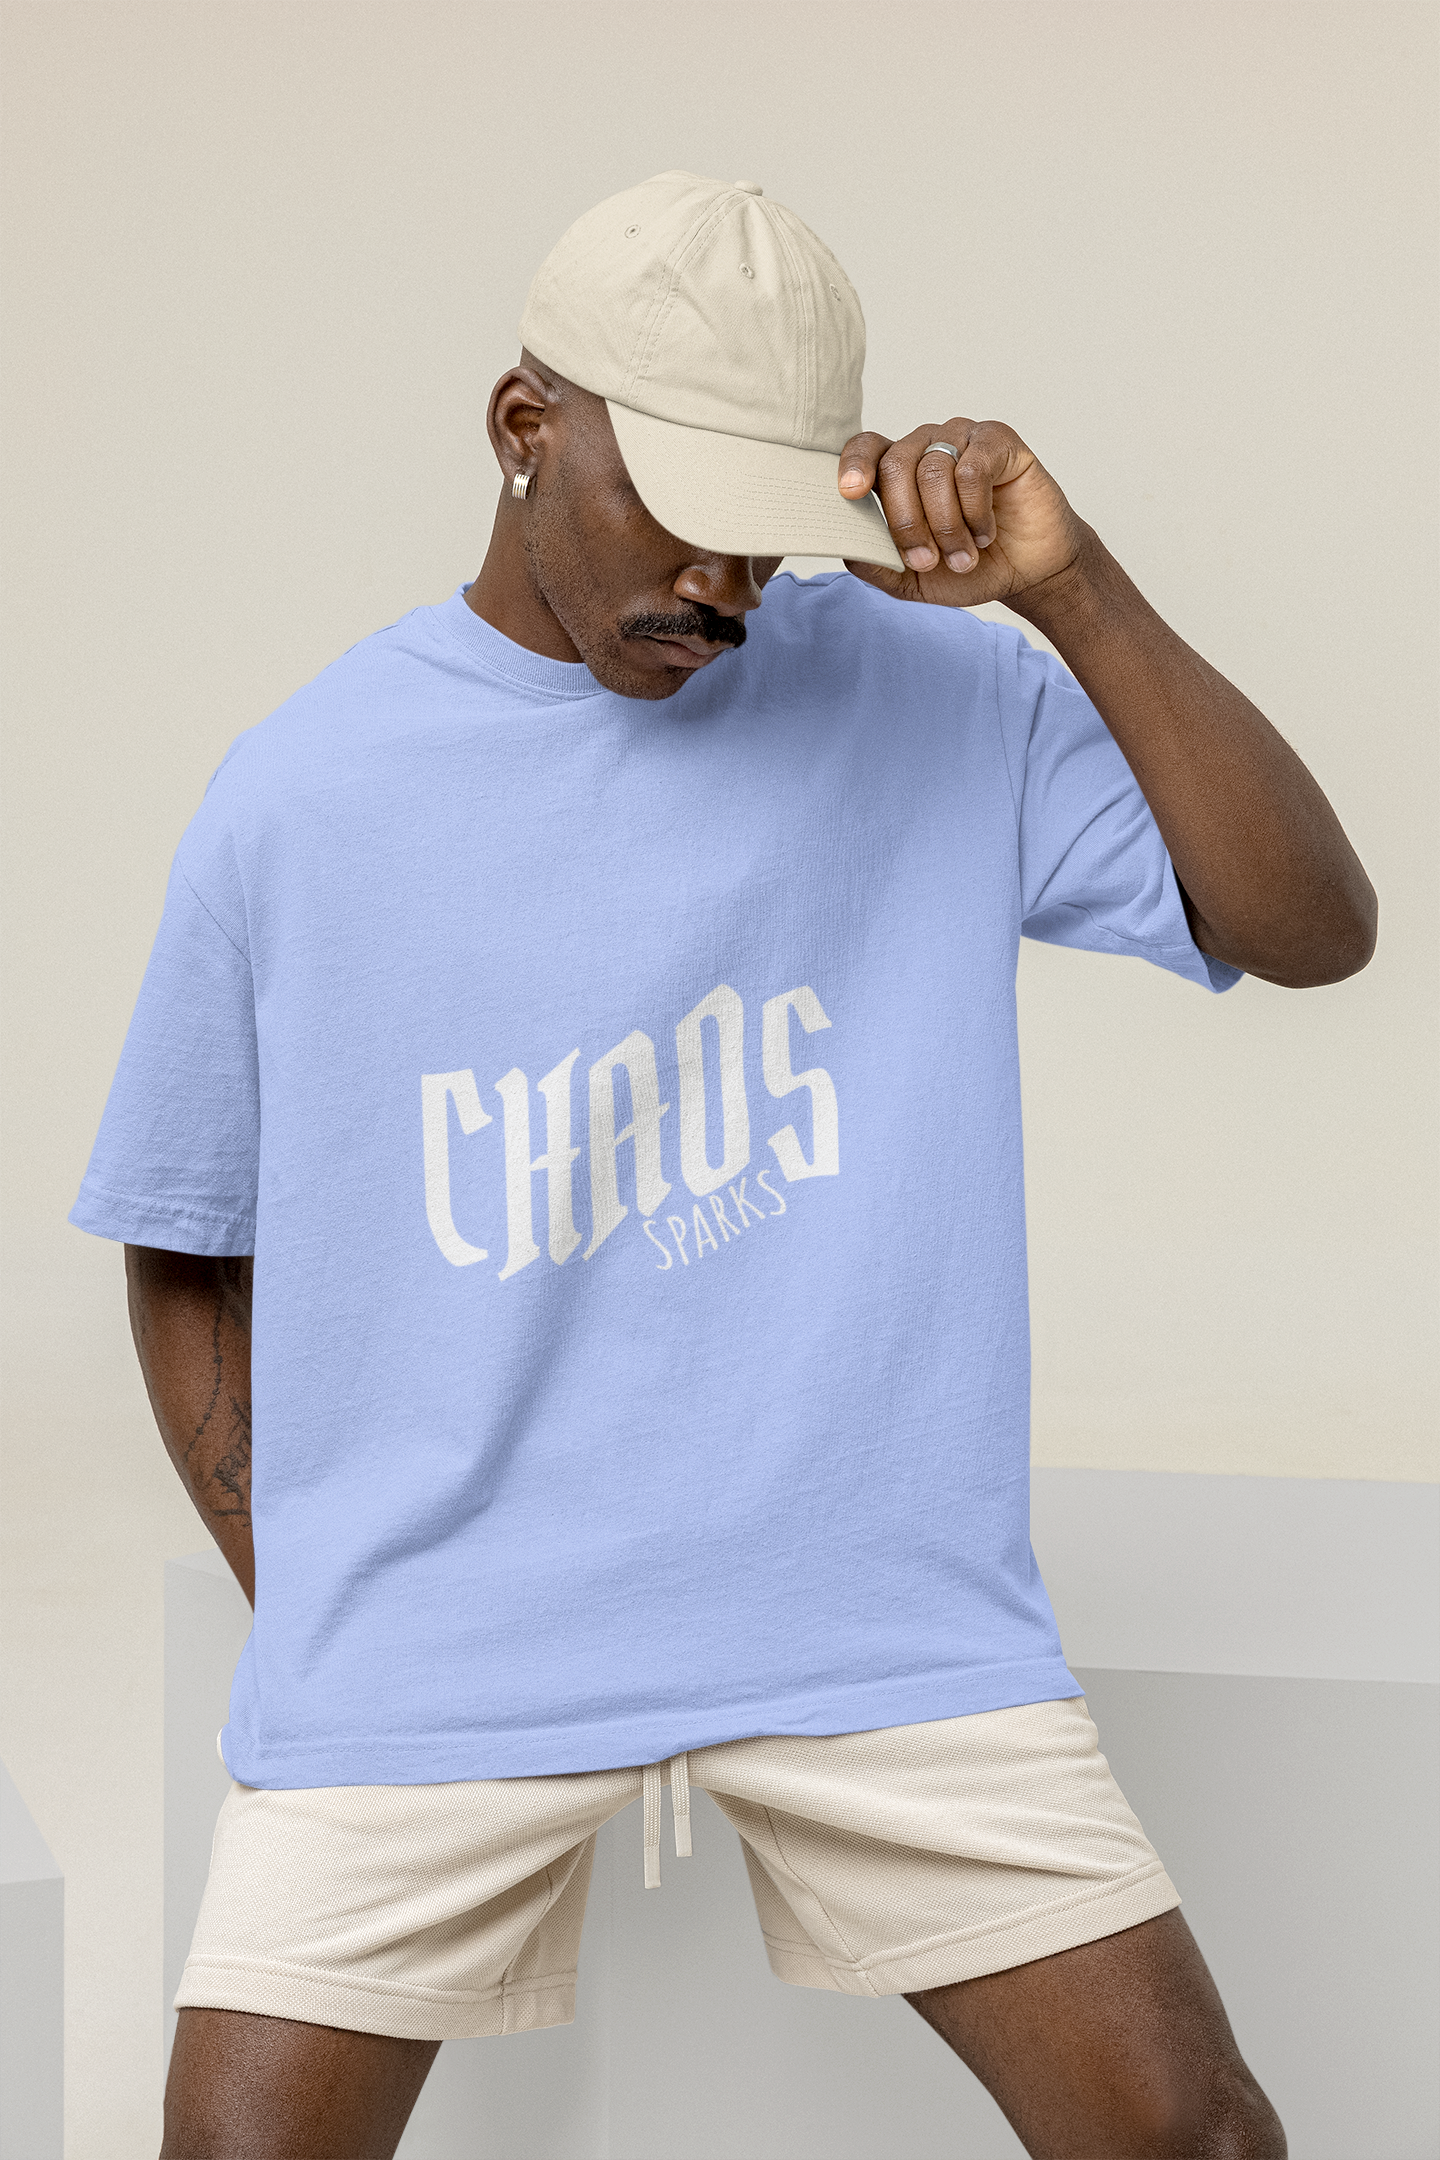 OVERSIZED TSHIRTS BABY BLUE: CHAOS